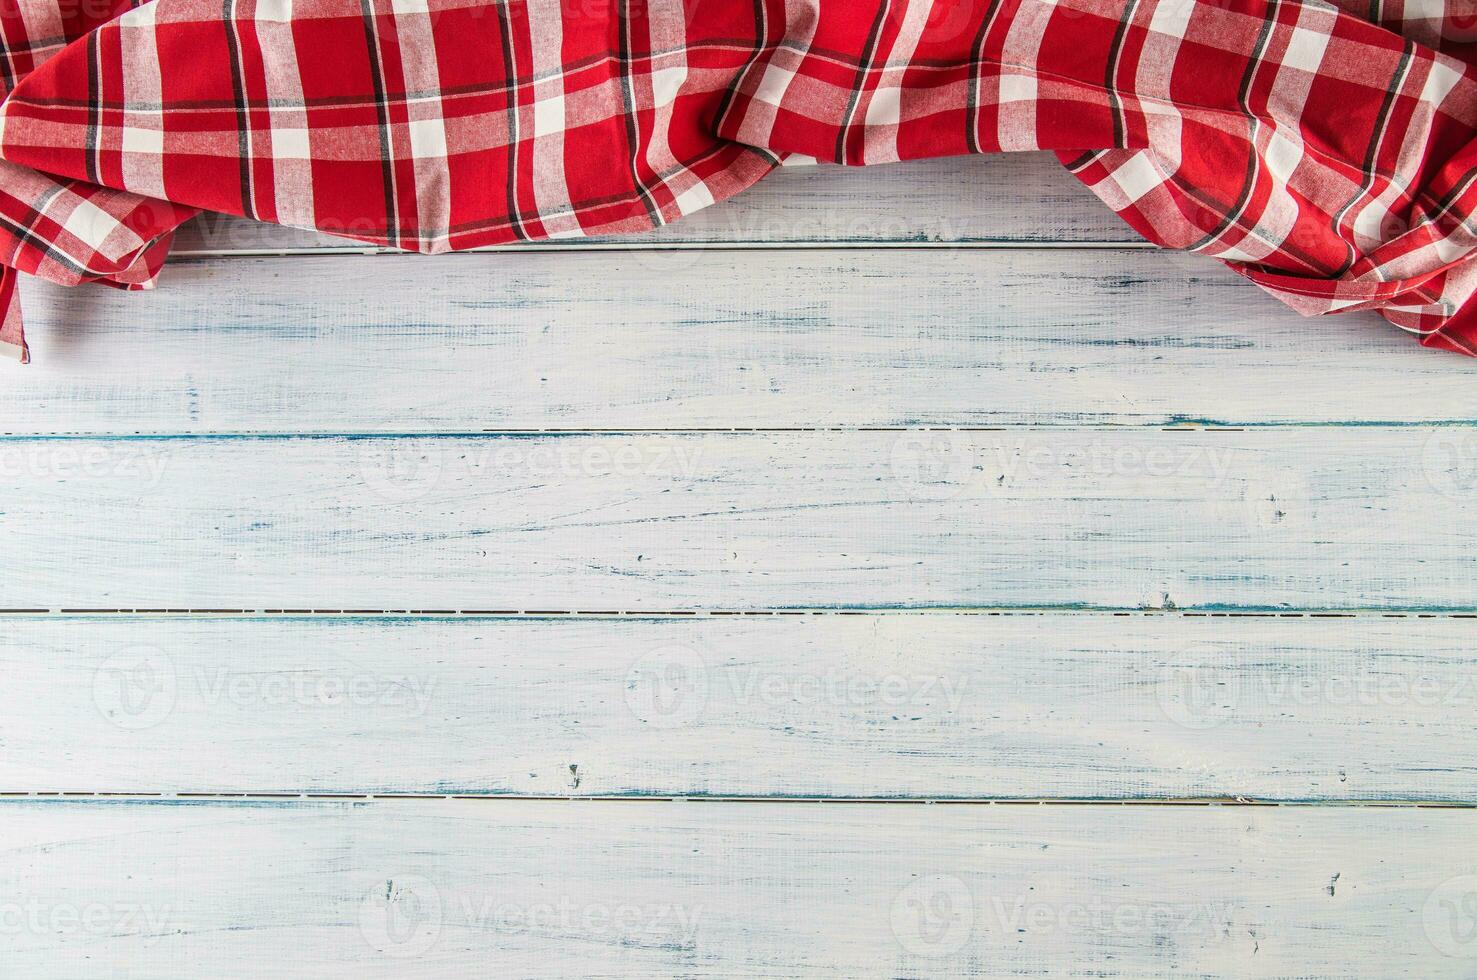 Top of view red checkered tablecloth on wooden table photo